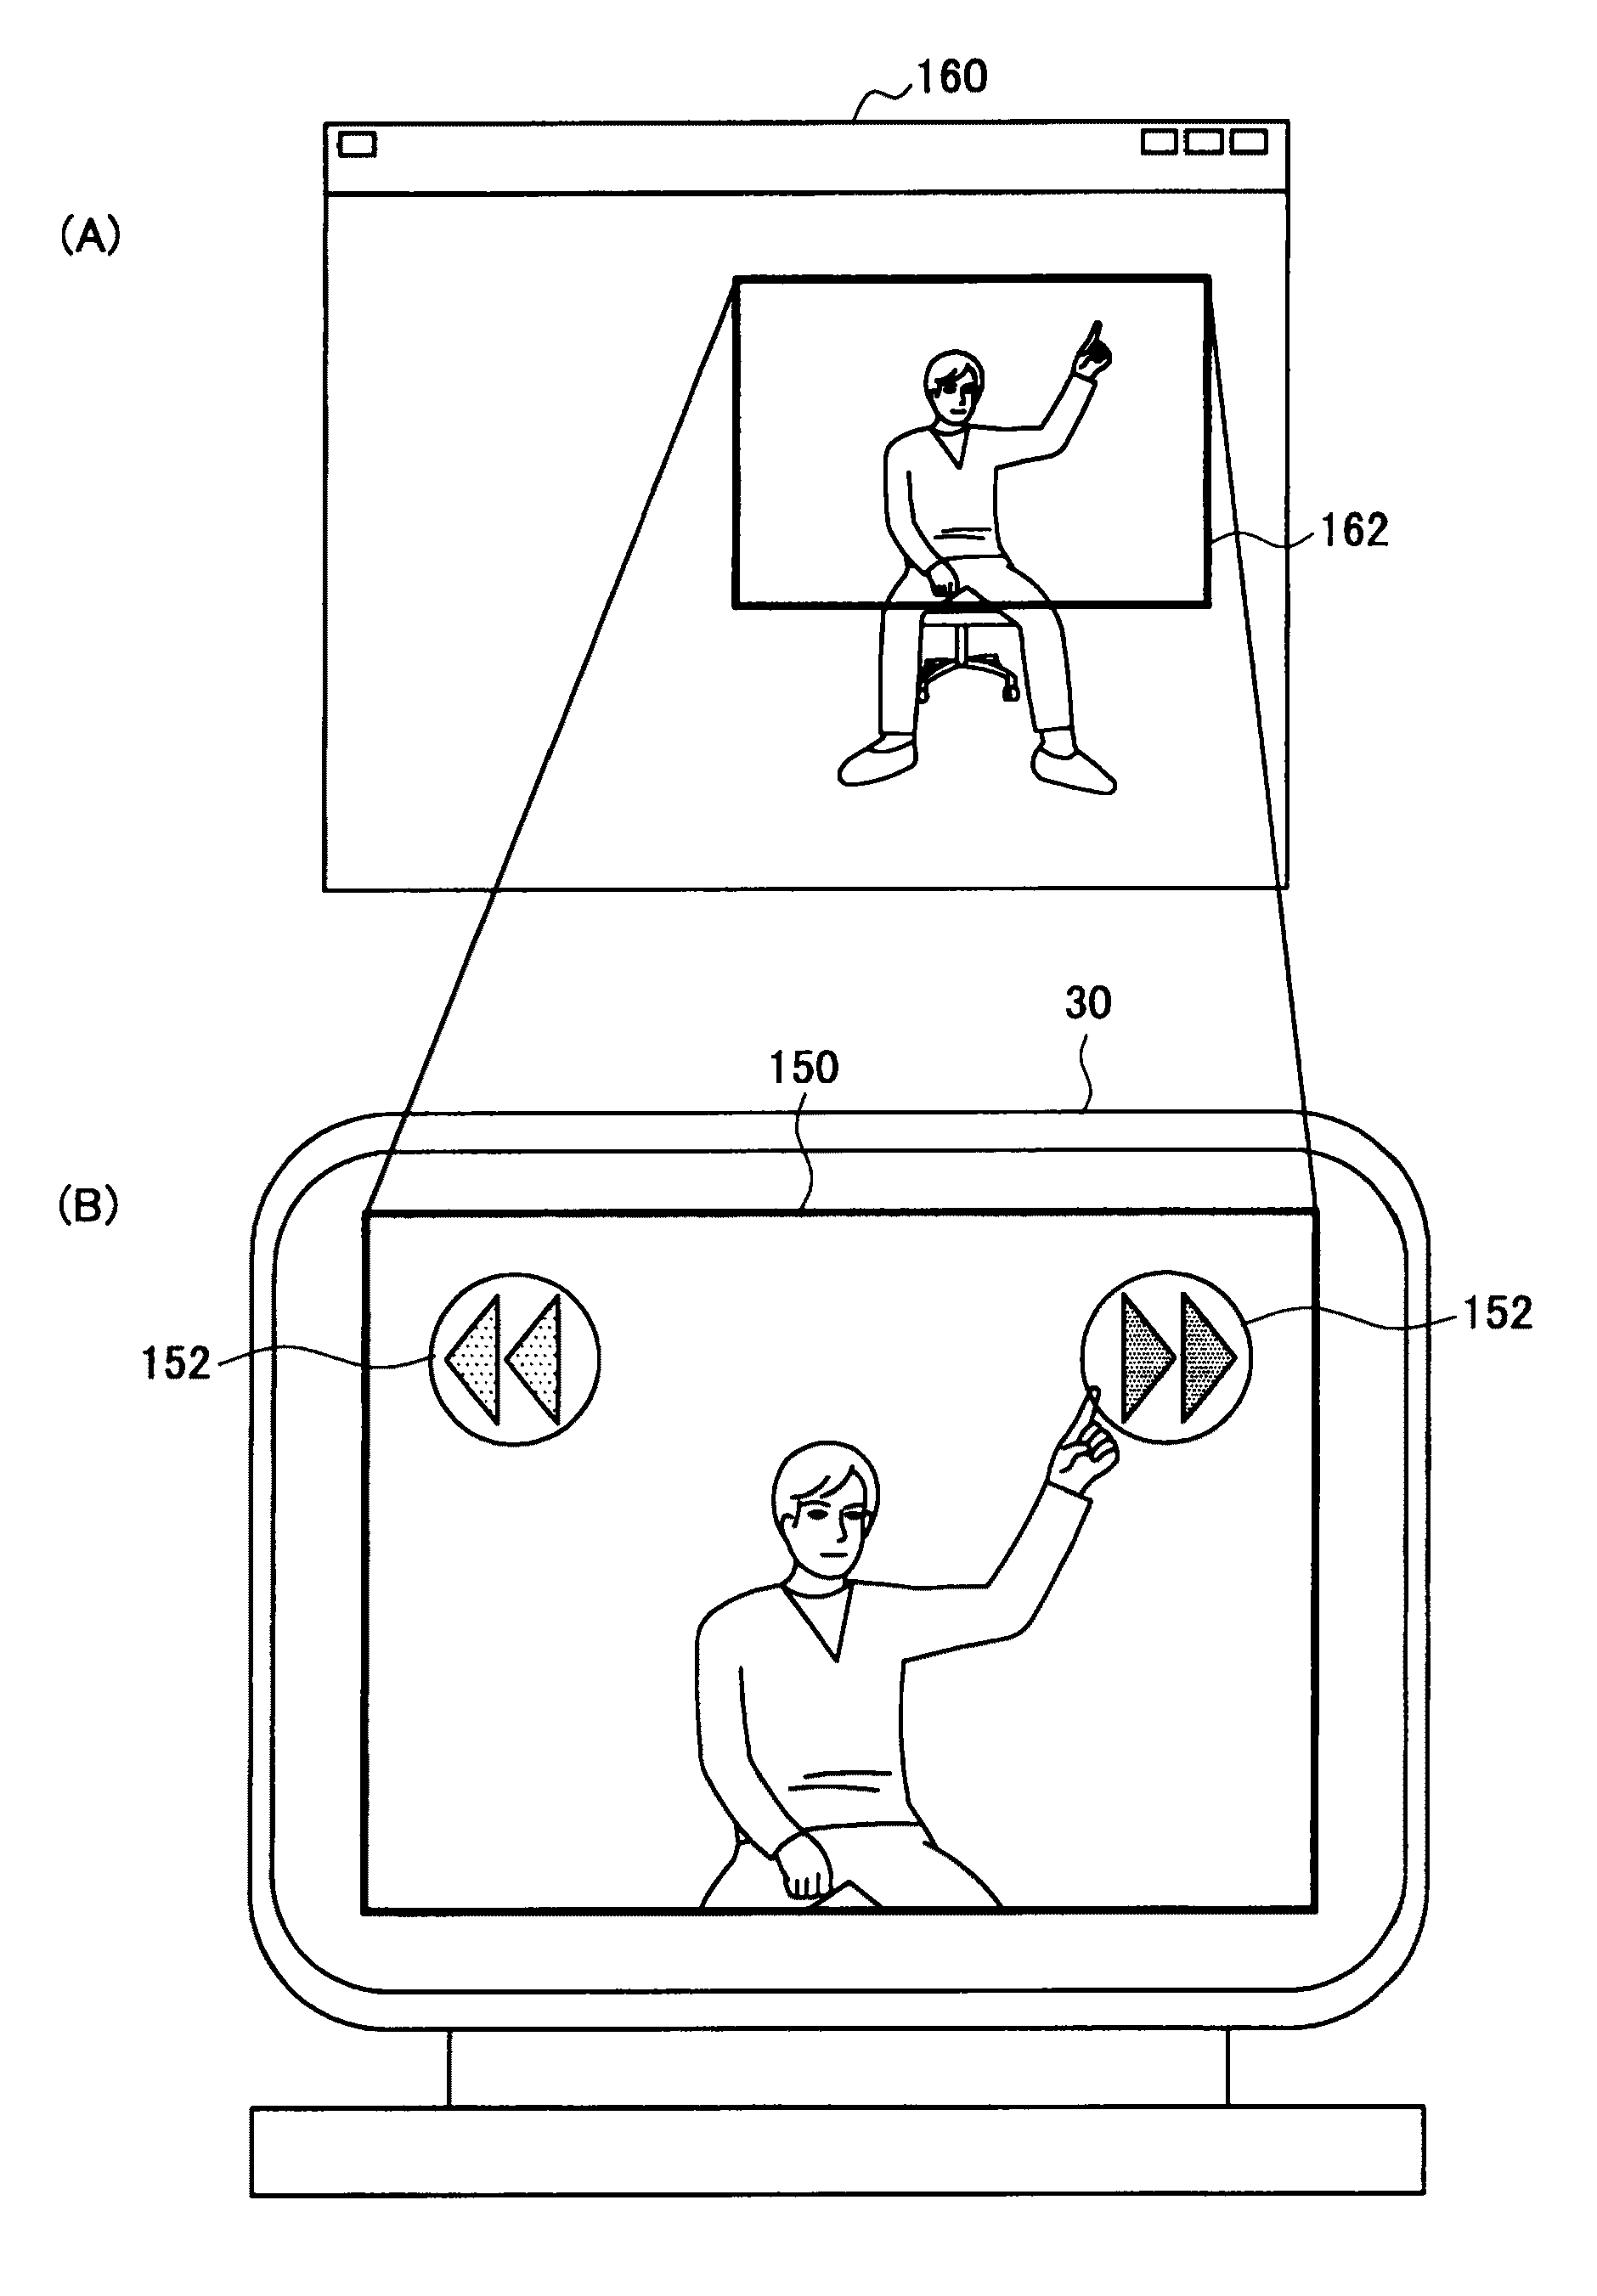 Image processing apparatus, method, and computer-readable storage medium calculation size and position of one of an entire person and a part of a person in an image